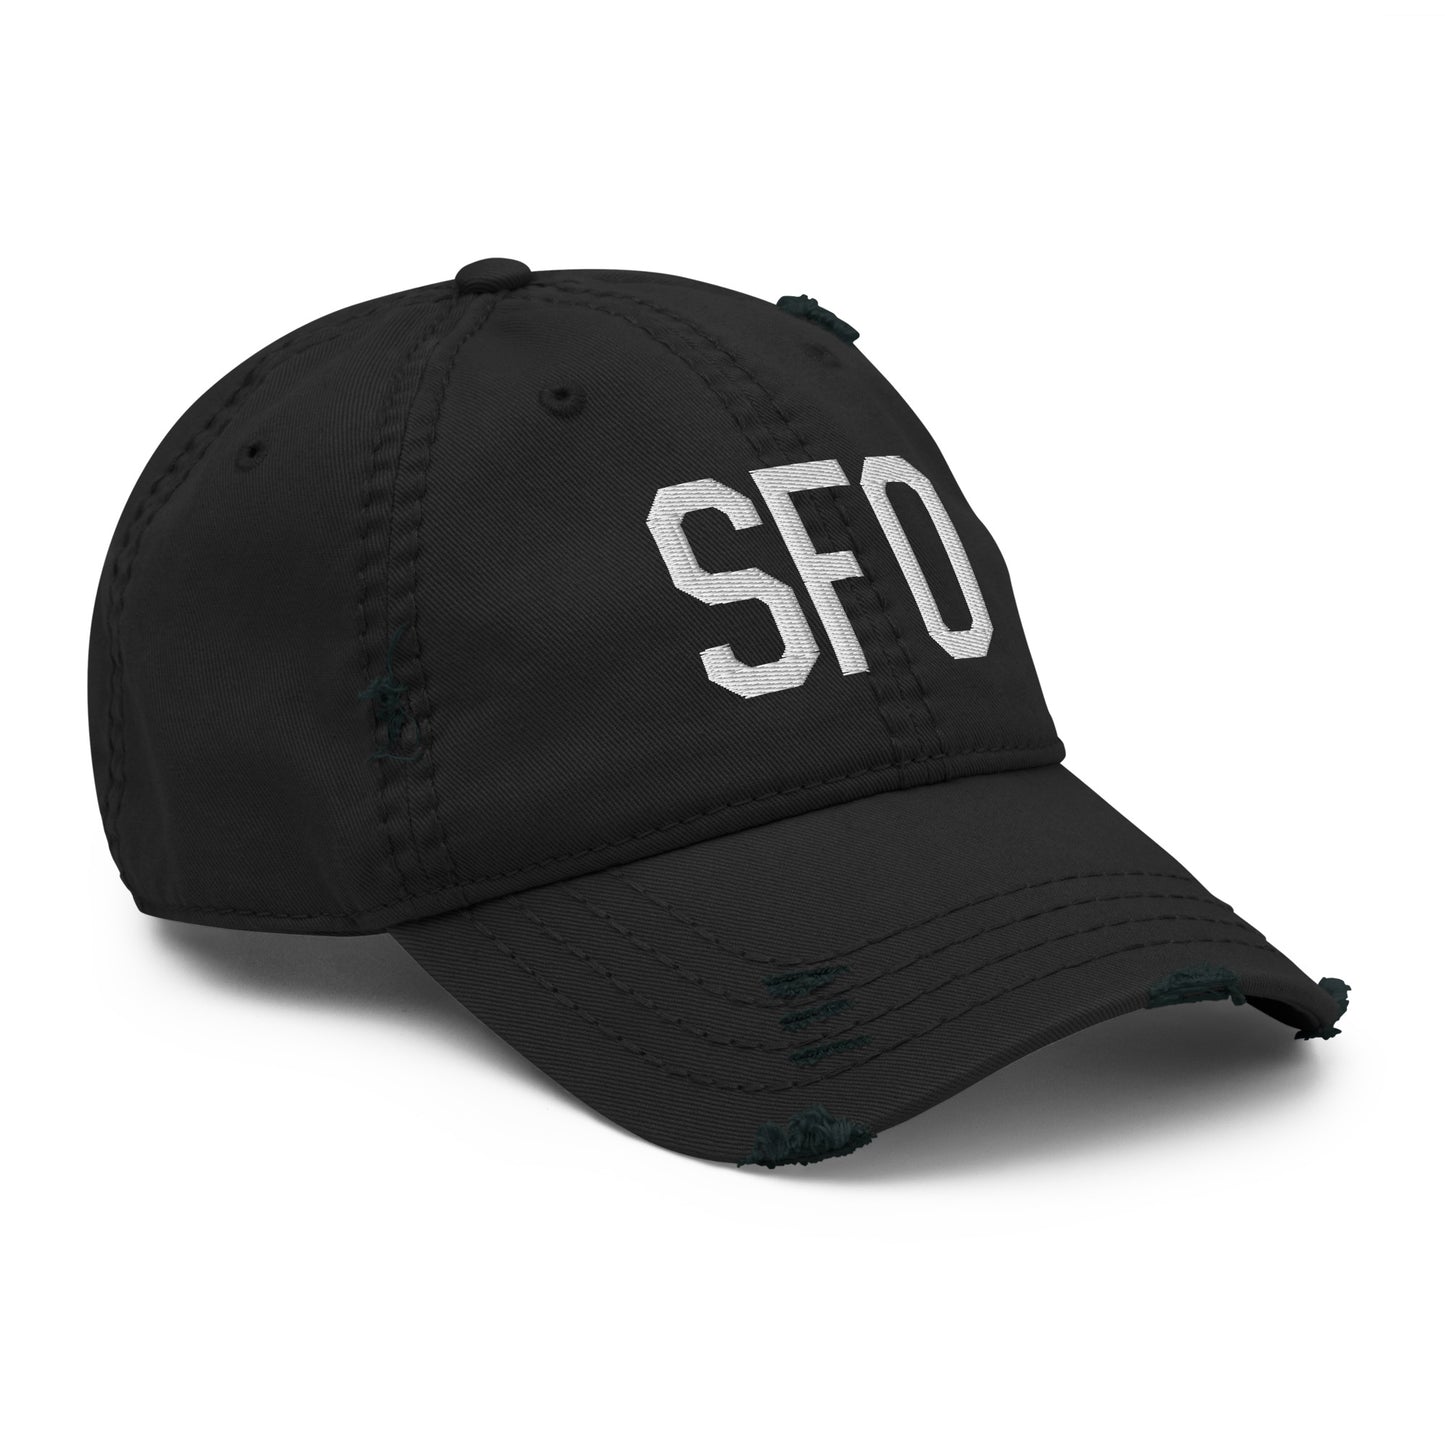 Airport Code Distressed Hat - White • SFO San Francisco • YHM Designs - Image 12